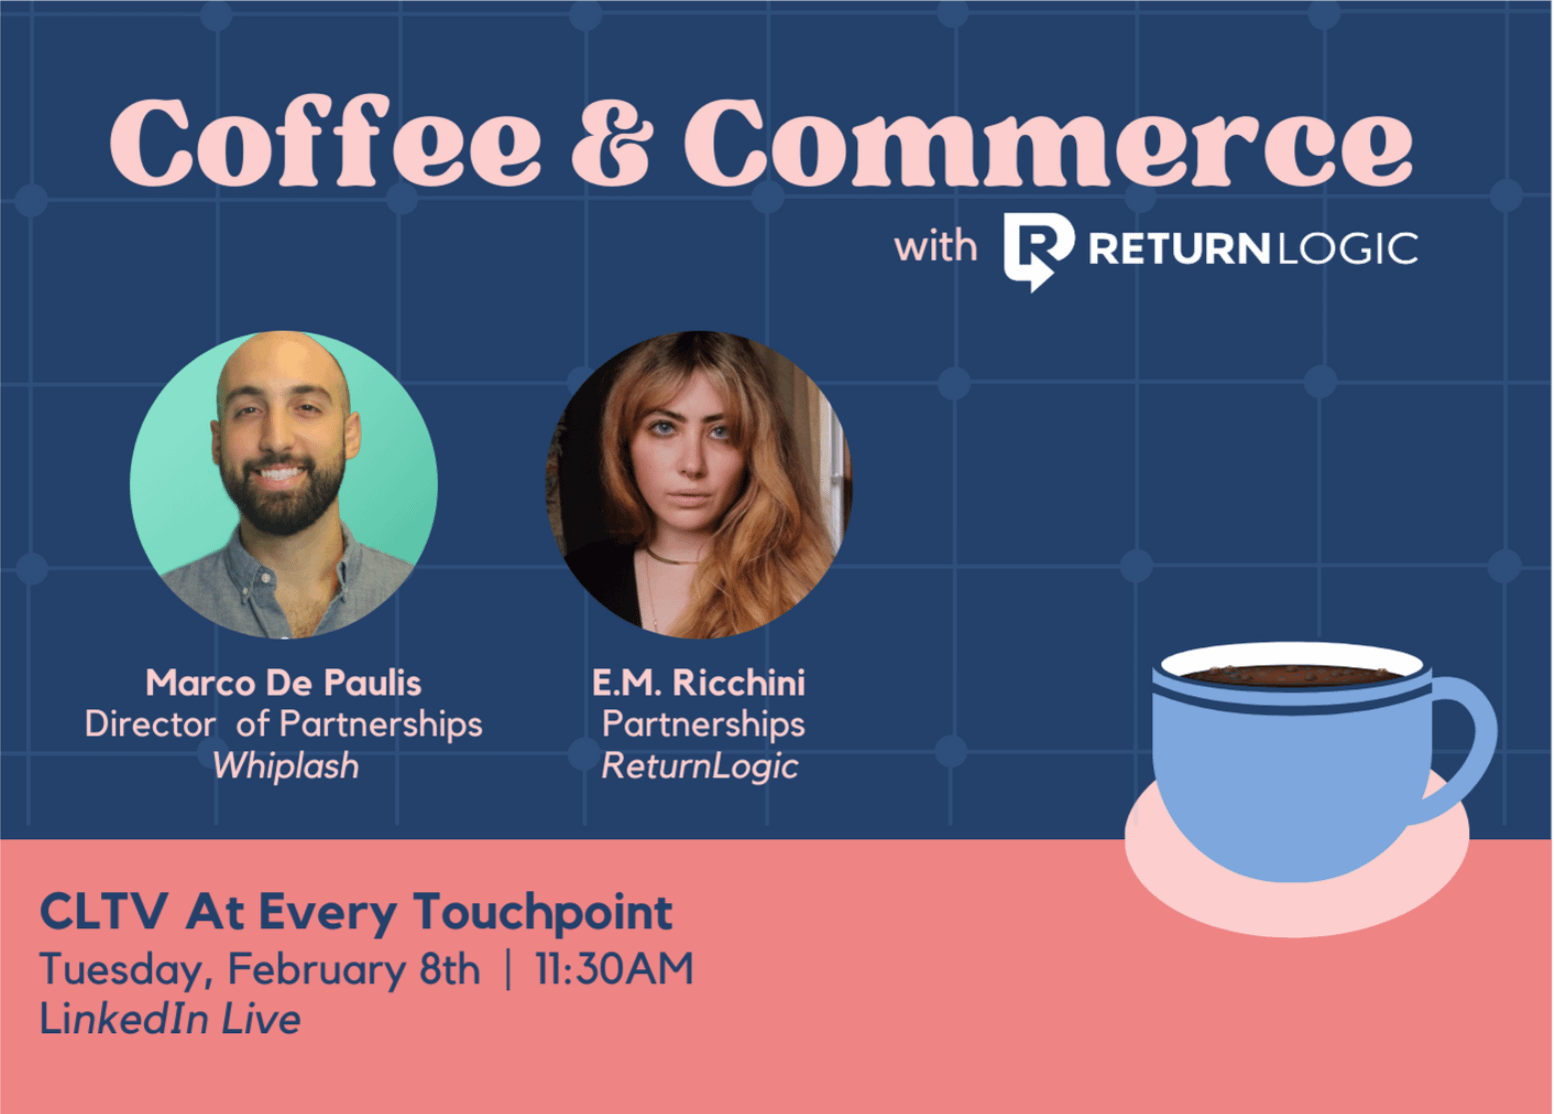 Coffee & Commerce: Optimizing CLV in the Post-Purchase Experience with Whiplash’s Marco De Paulis